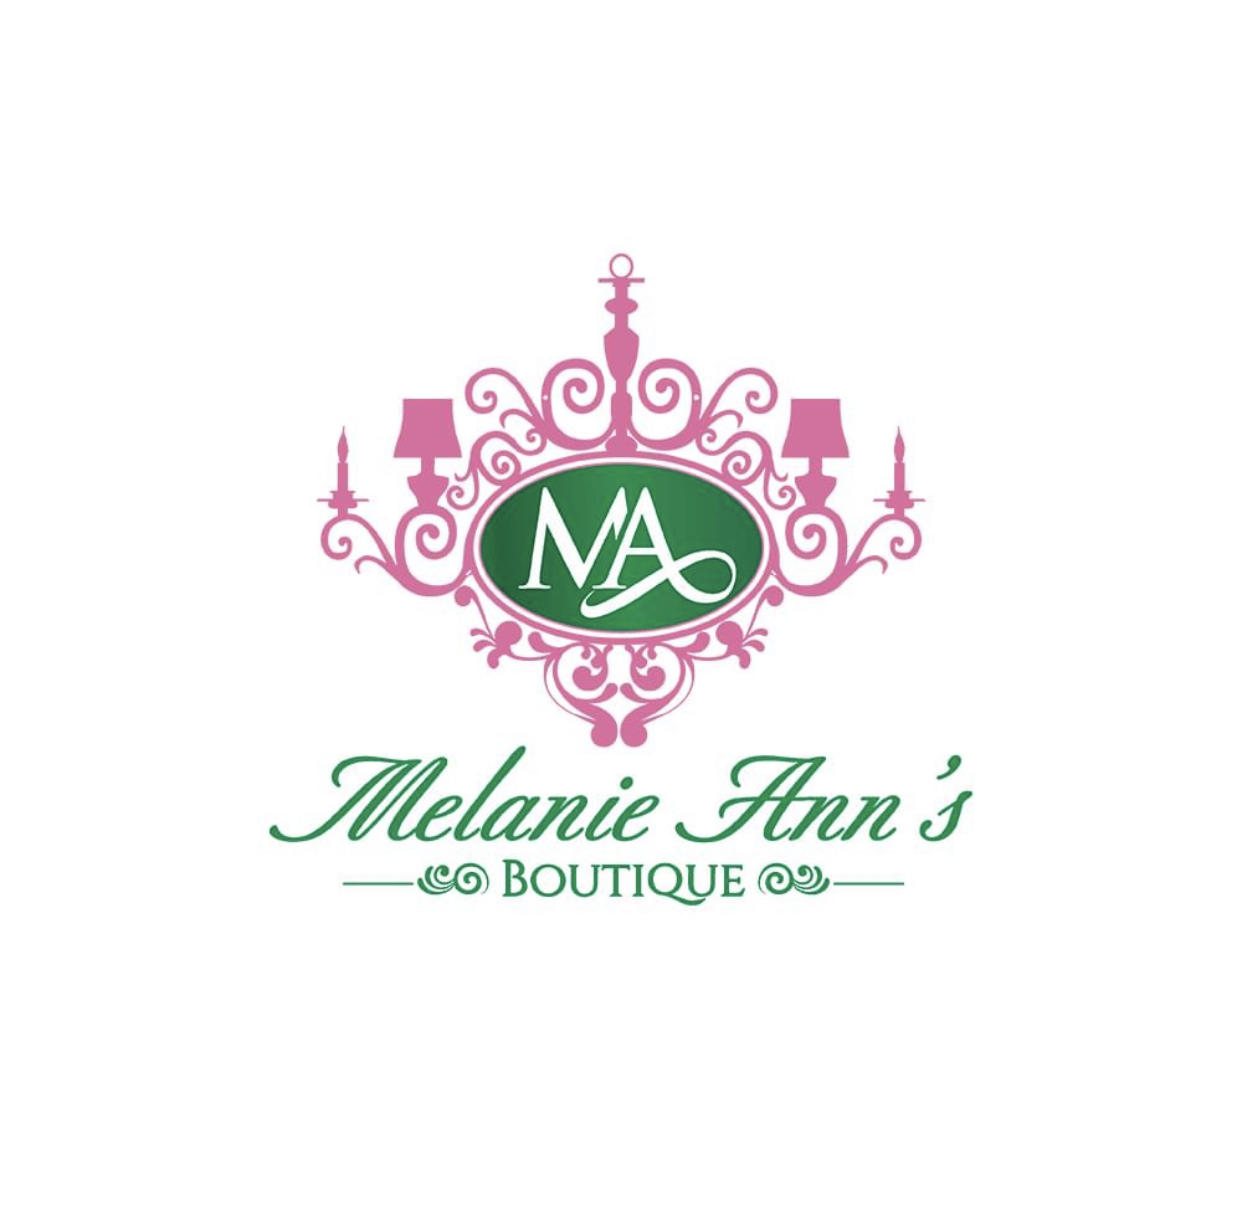 The logo or business face of "Melanie Ann's Boutique"